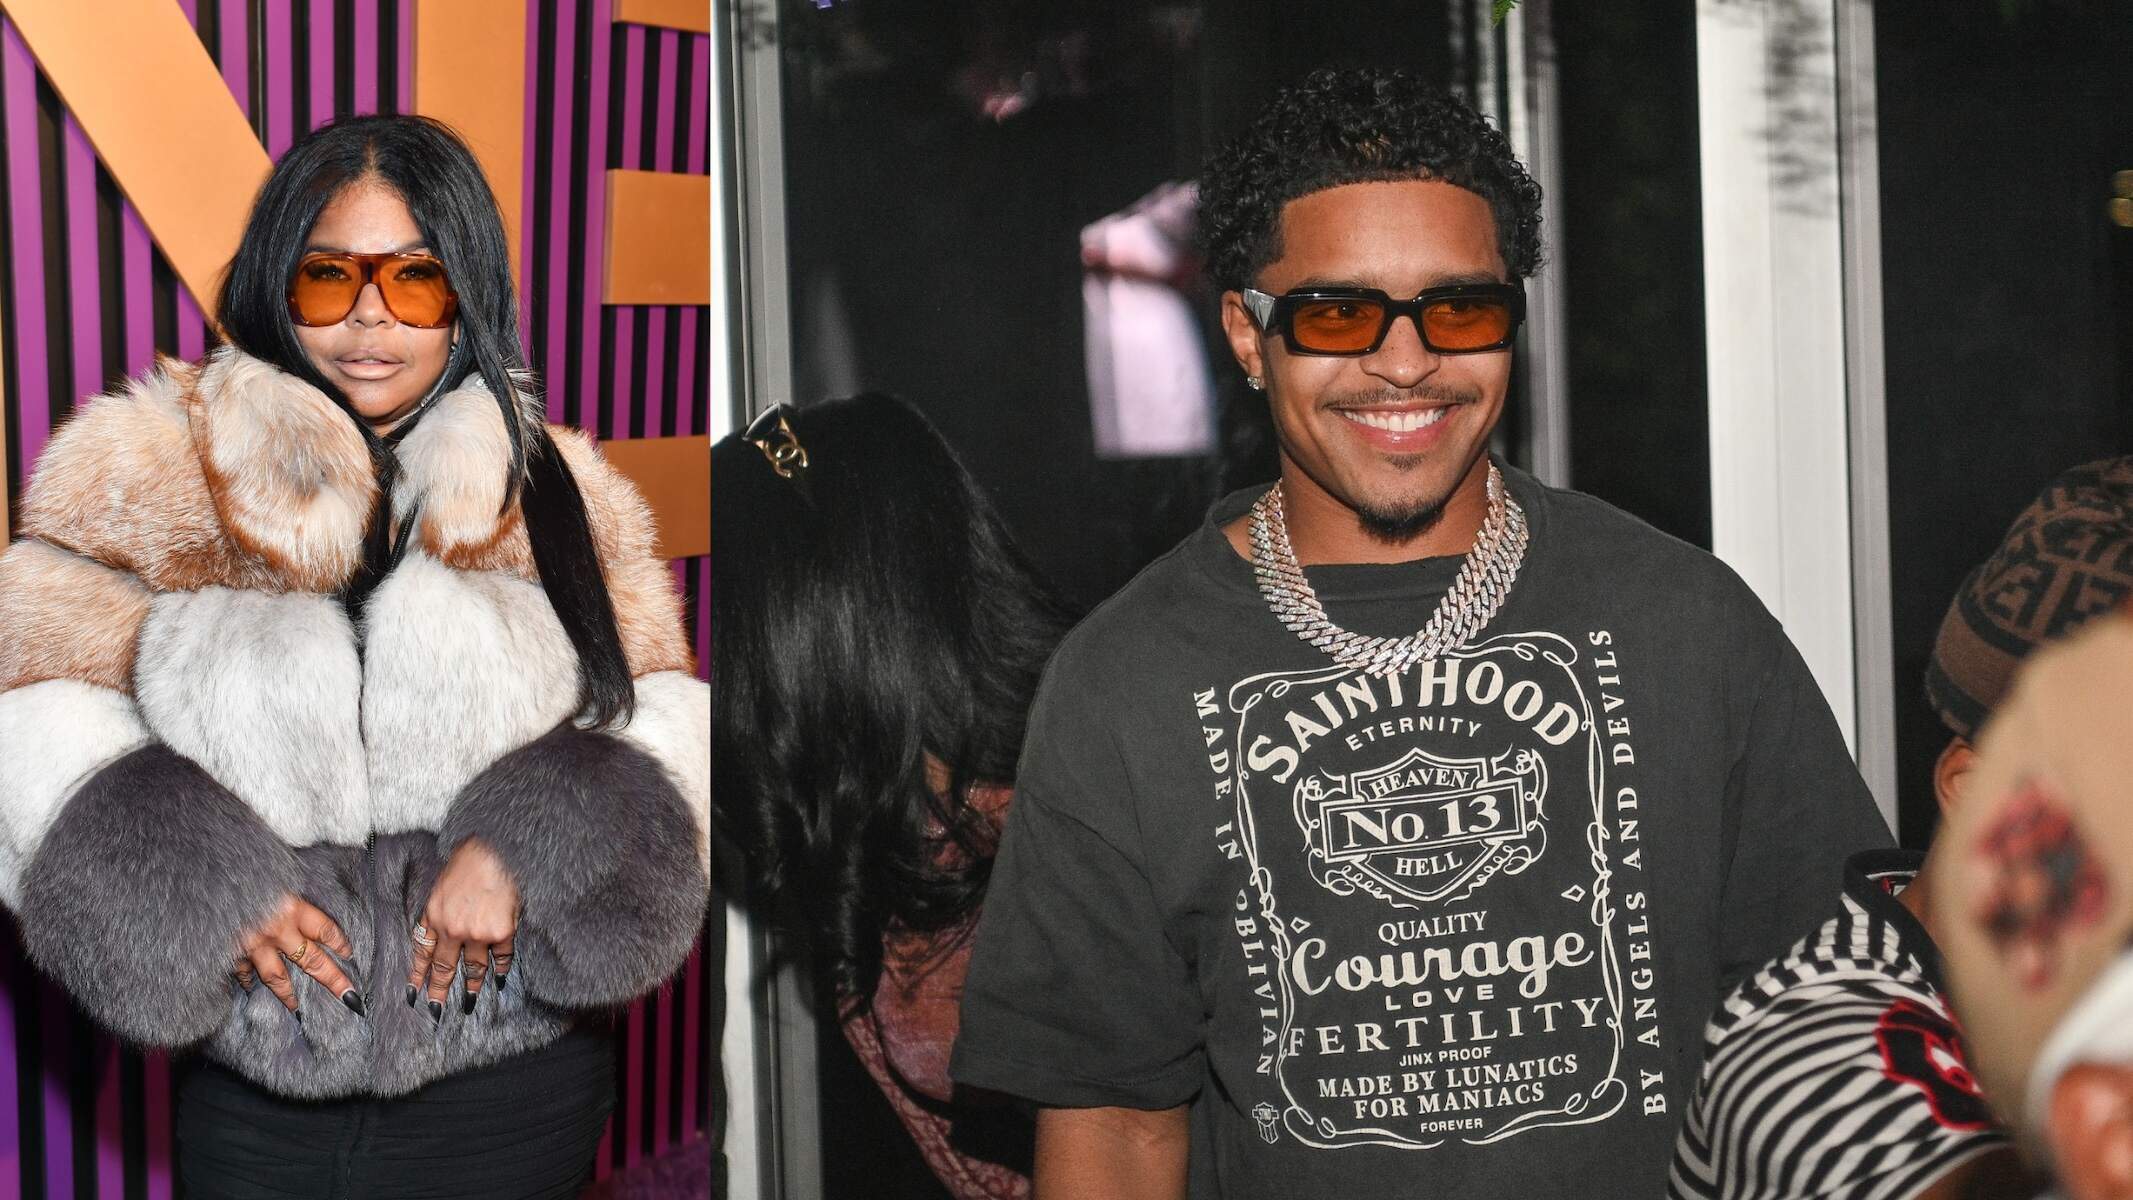 A photo of Misa Hylton in a fur coat alongside a photo of Justin Combs in a black tee shirt